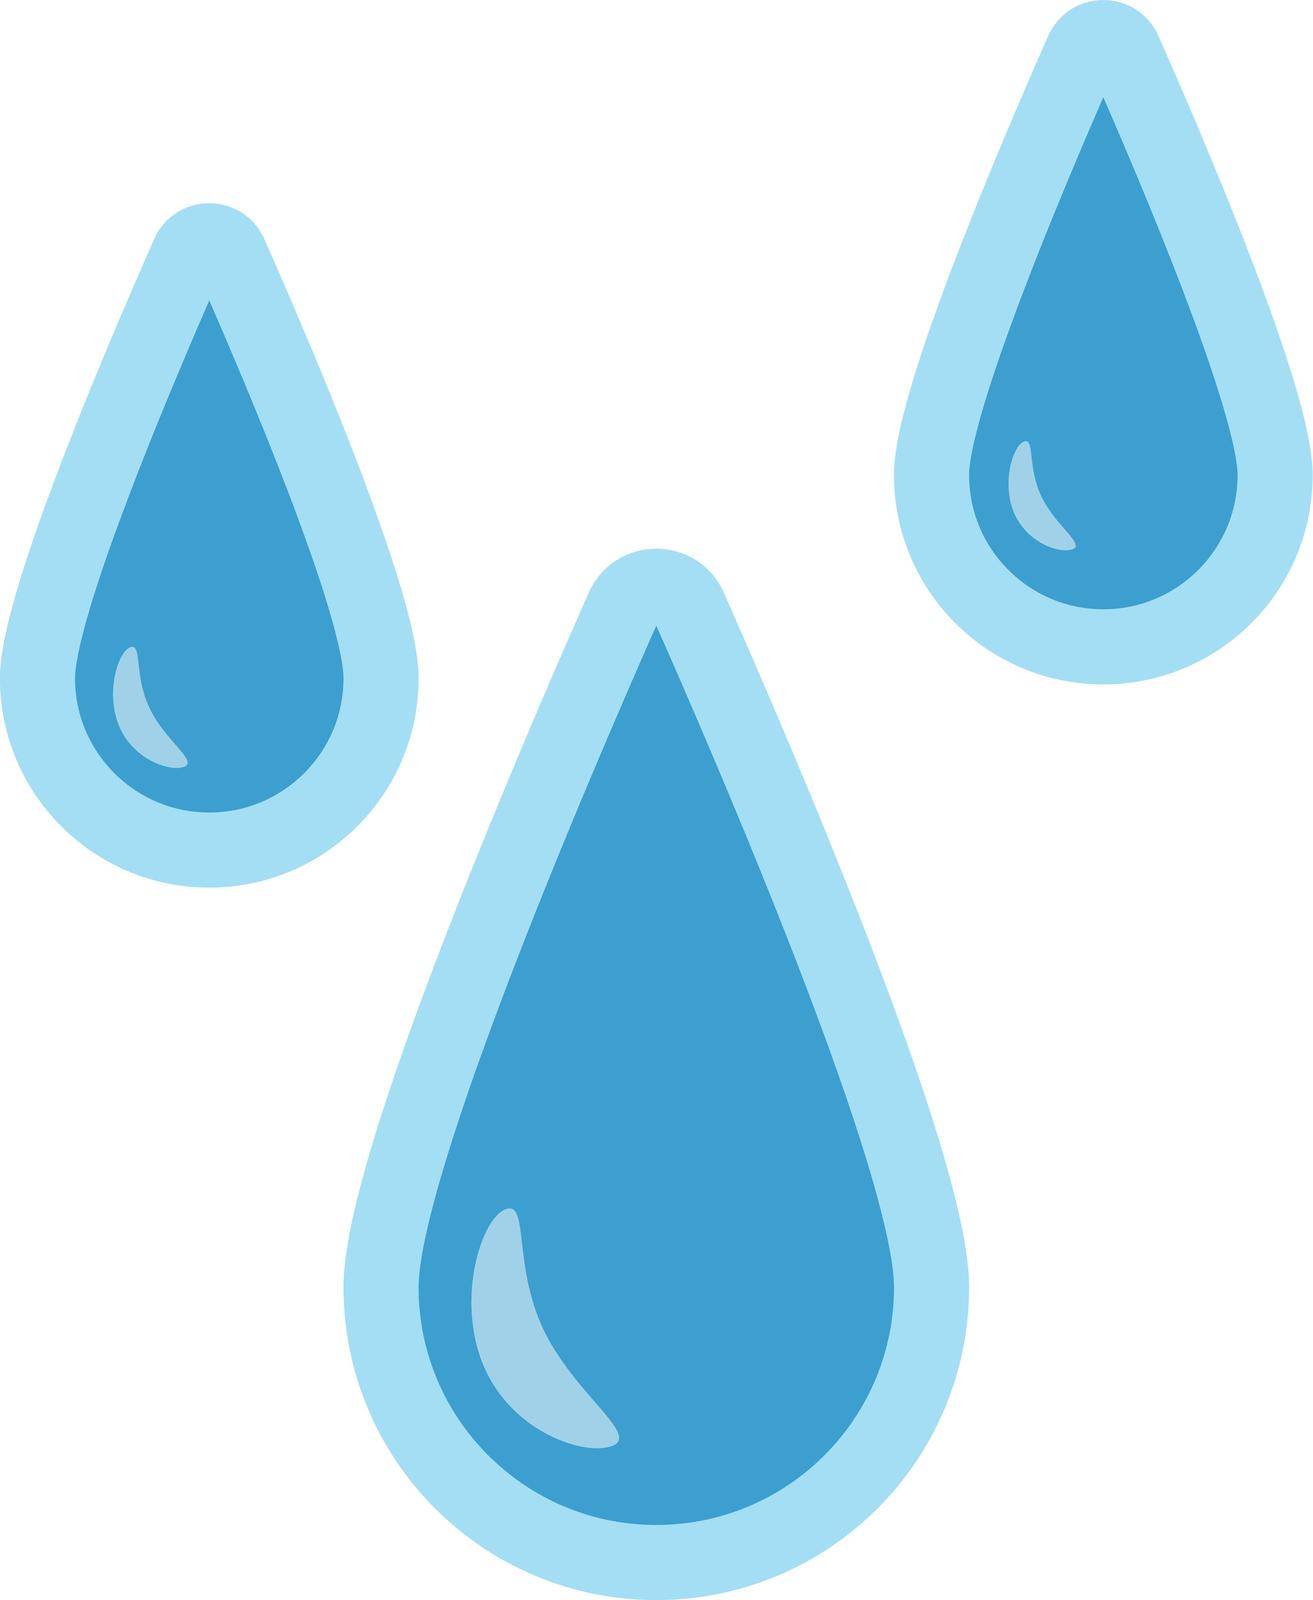 Three drops of water drops icon. vector. by illust_monster